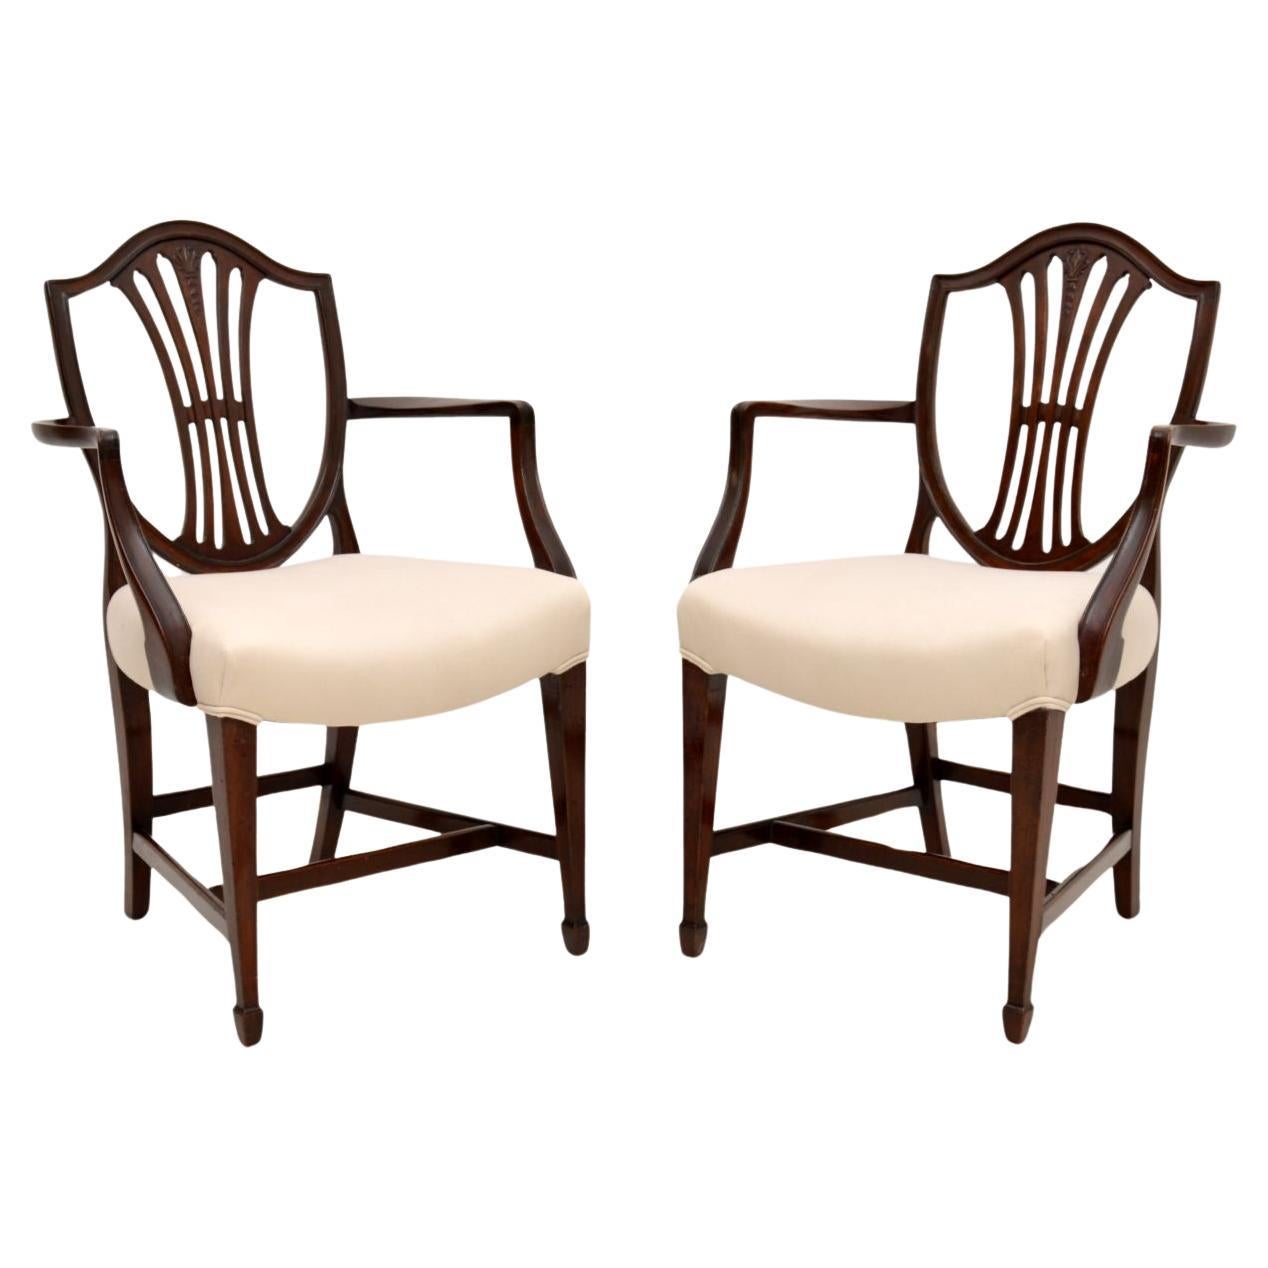 Pair of Antique Georgian Style Carver Armchairs